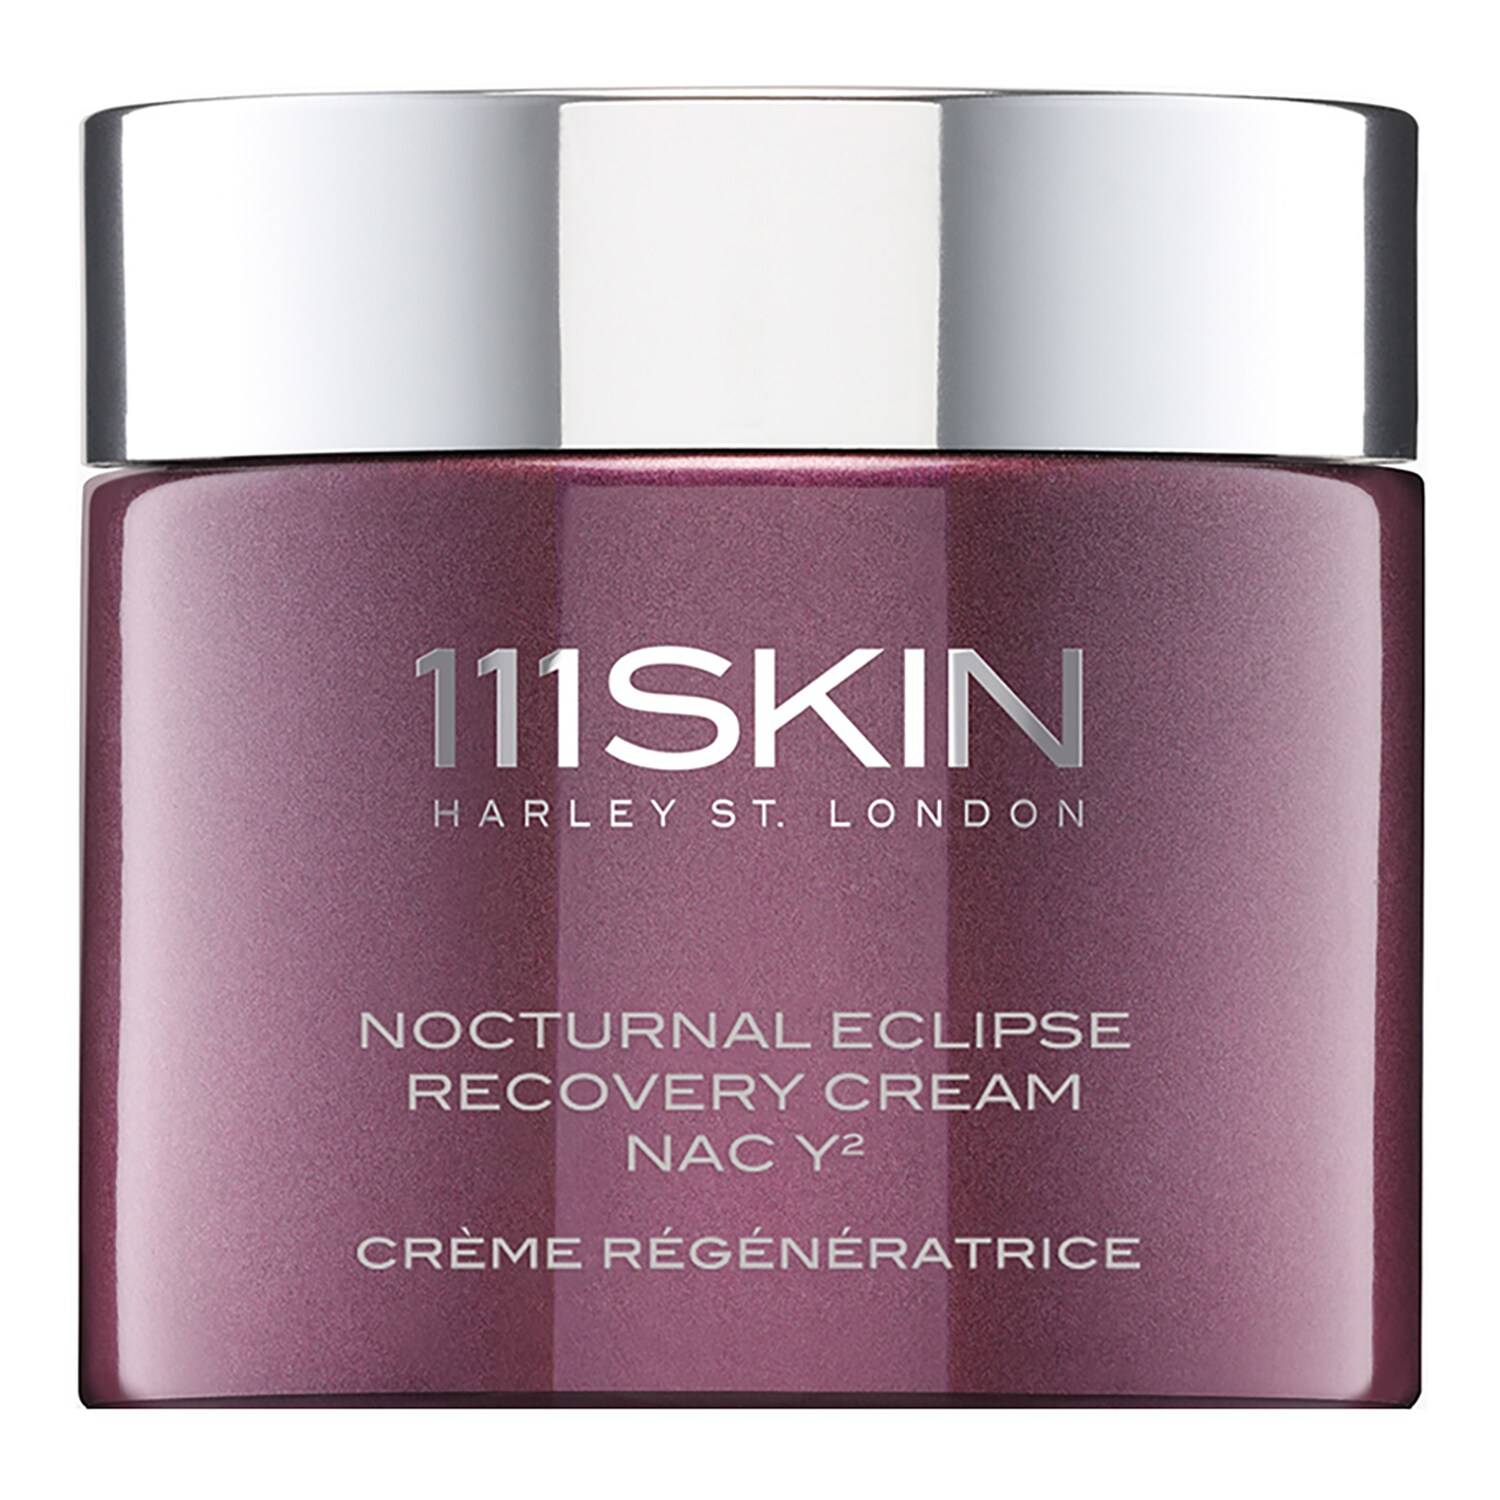 111Skin Nocturnal Eclipse Recovery Cream Nac Y2 50Ml